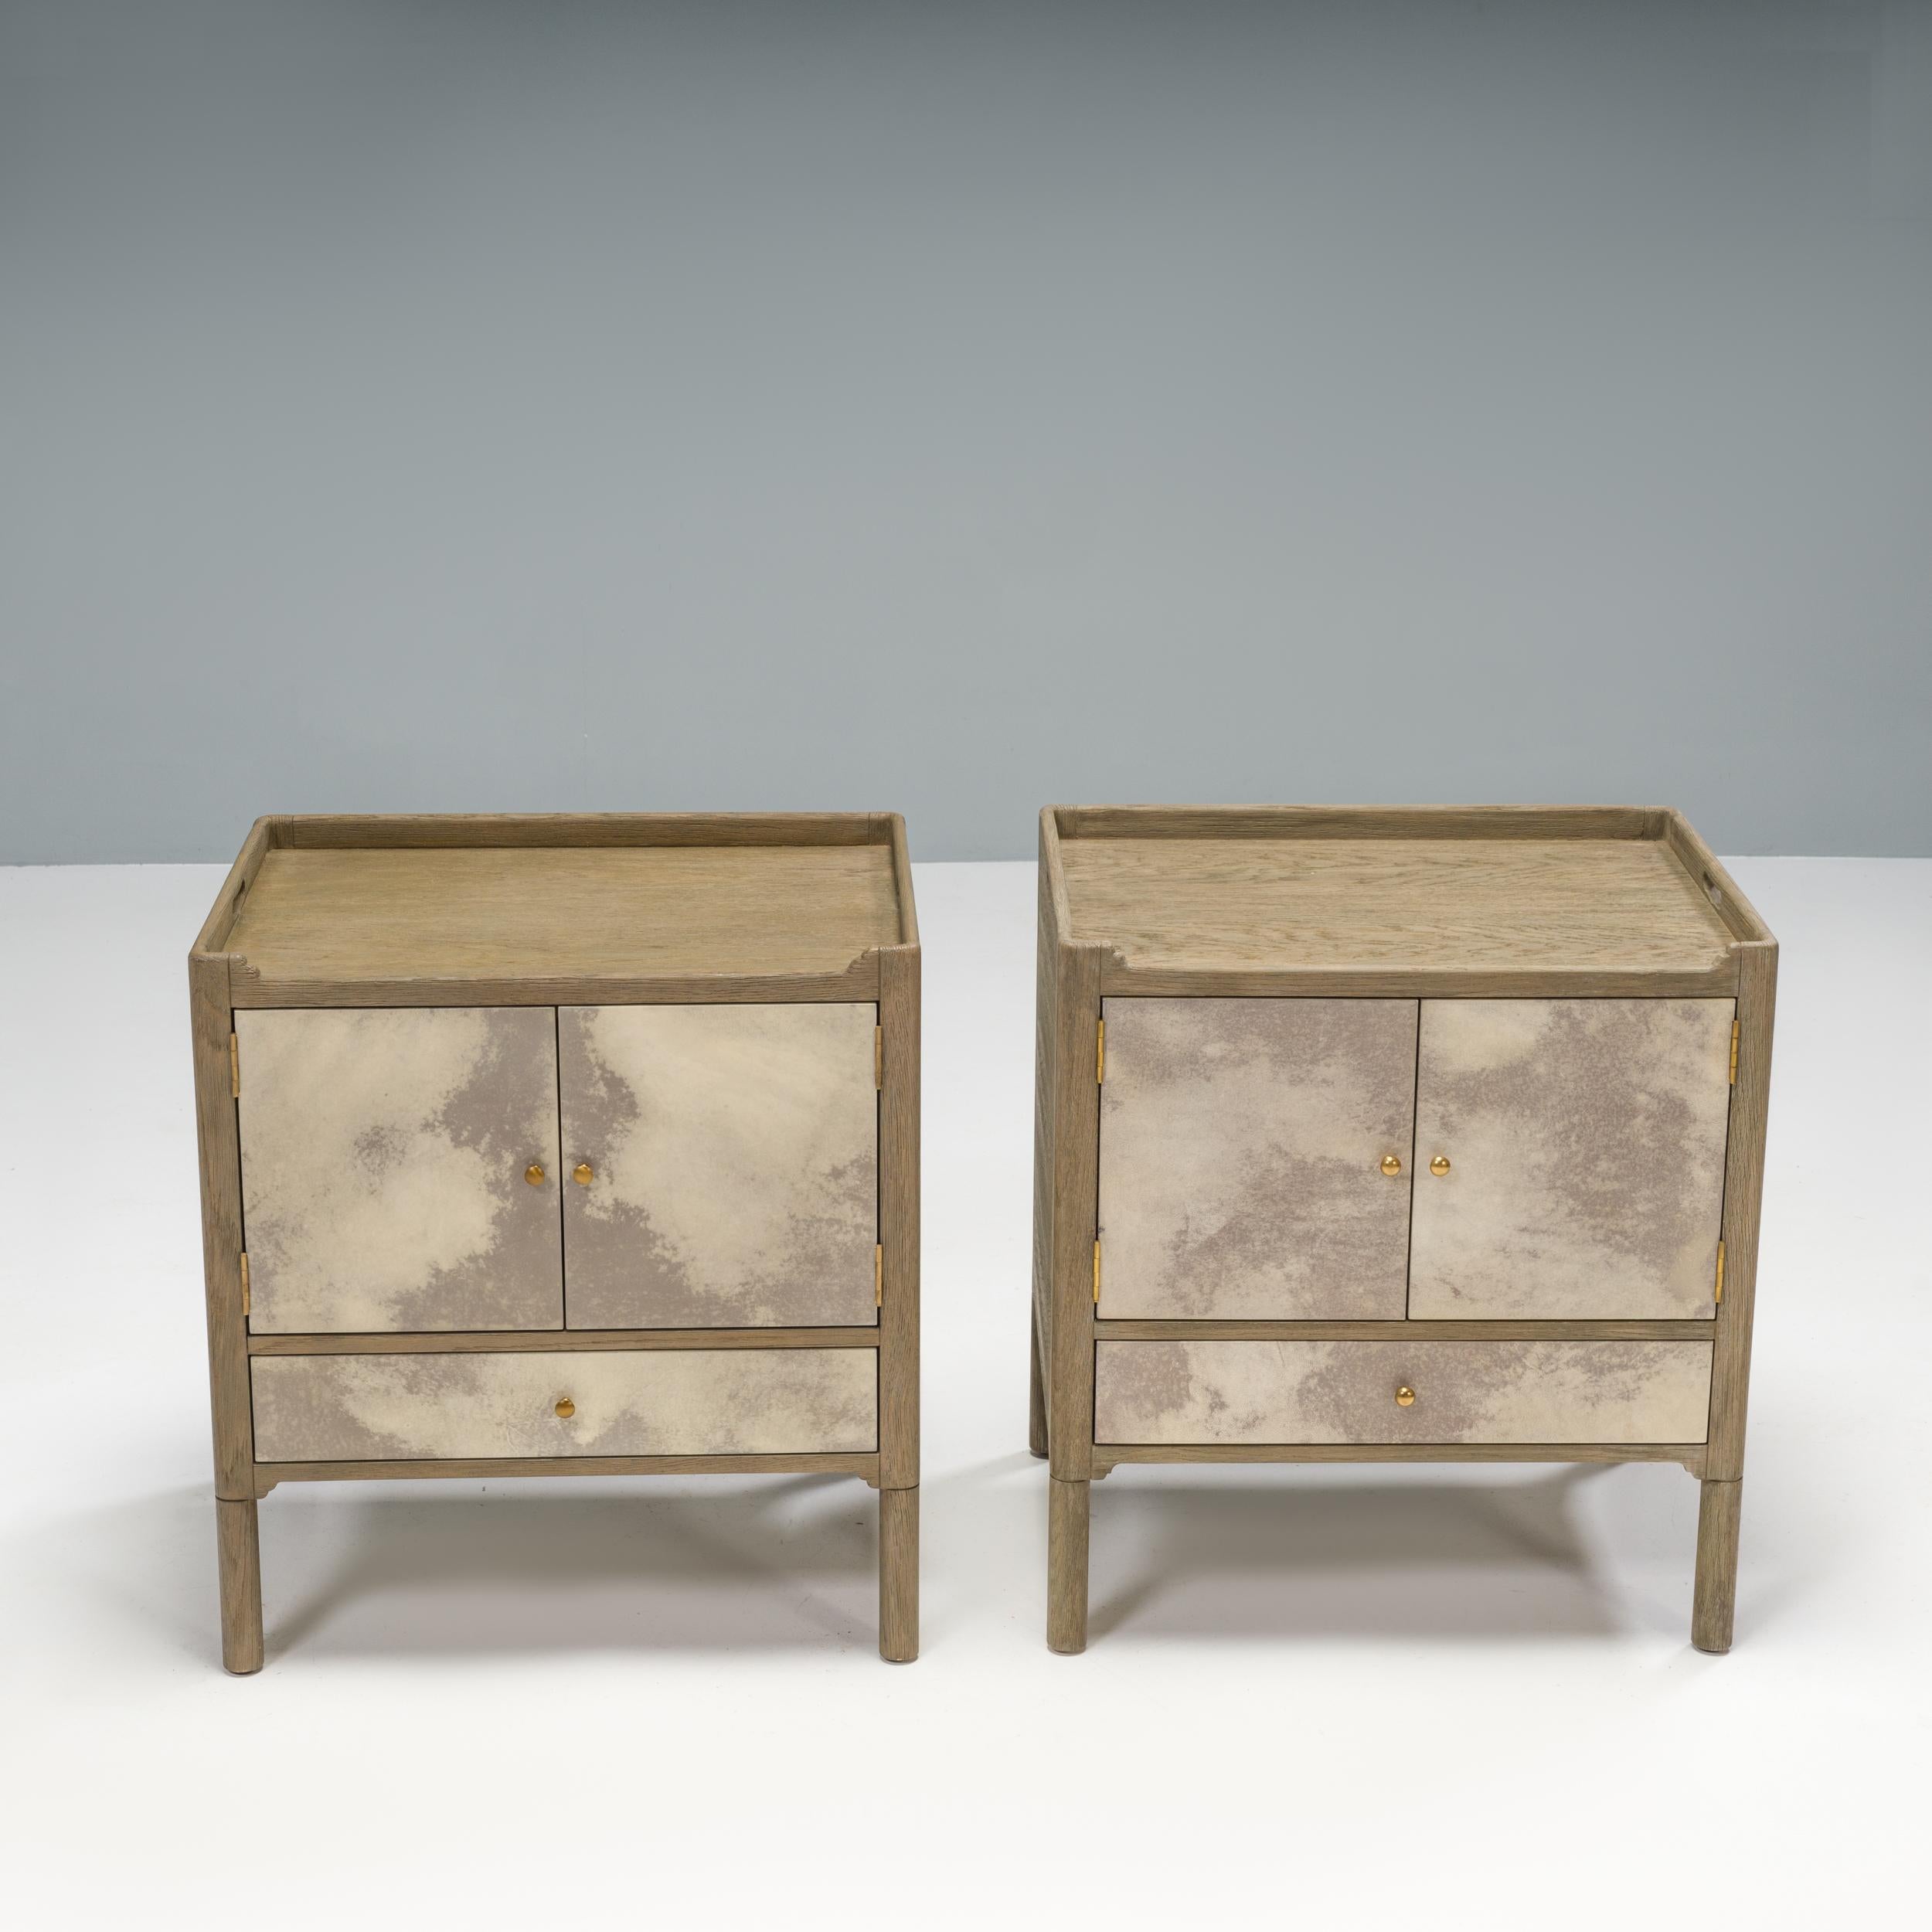 Designed by Julian Chichester, the Monty bedside table perfectly balances modern style with practical storage.

Giving the classic Georgian bedside table a contemporary twist, the cabinet is constructed from finished Hobbs oak and features a